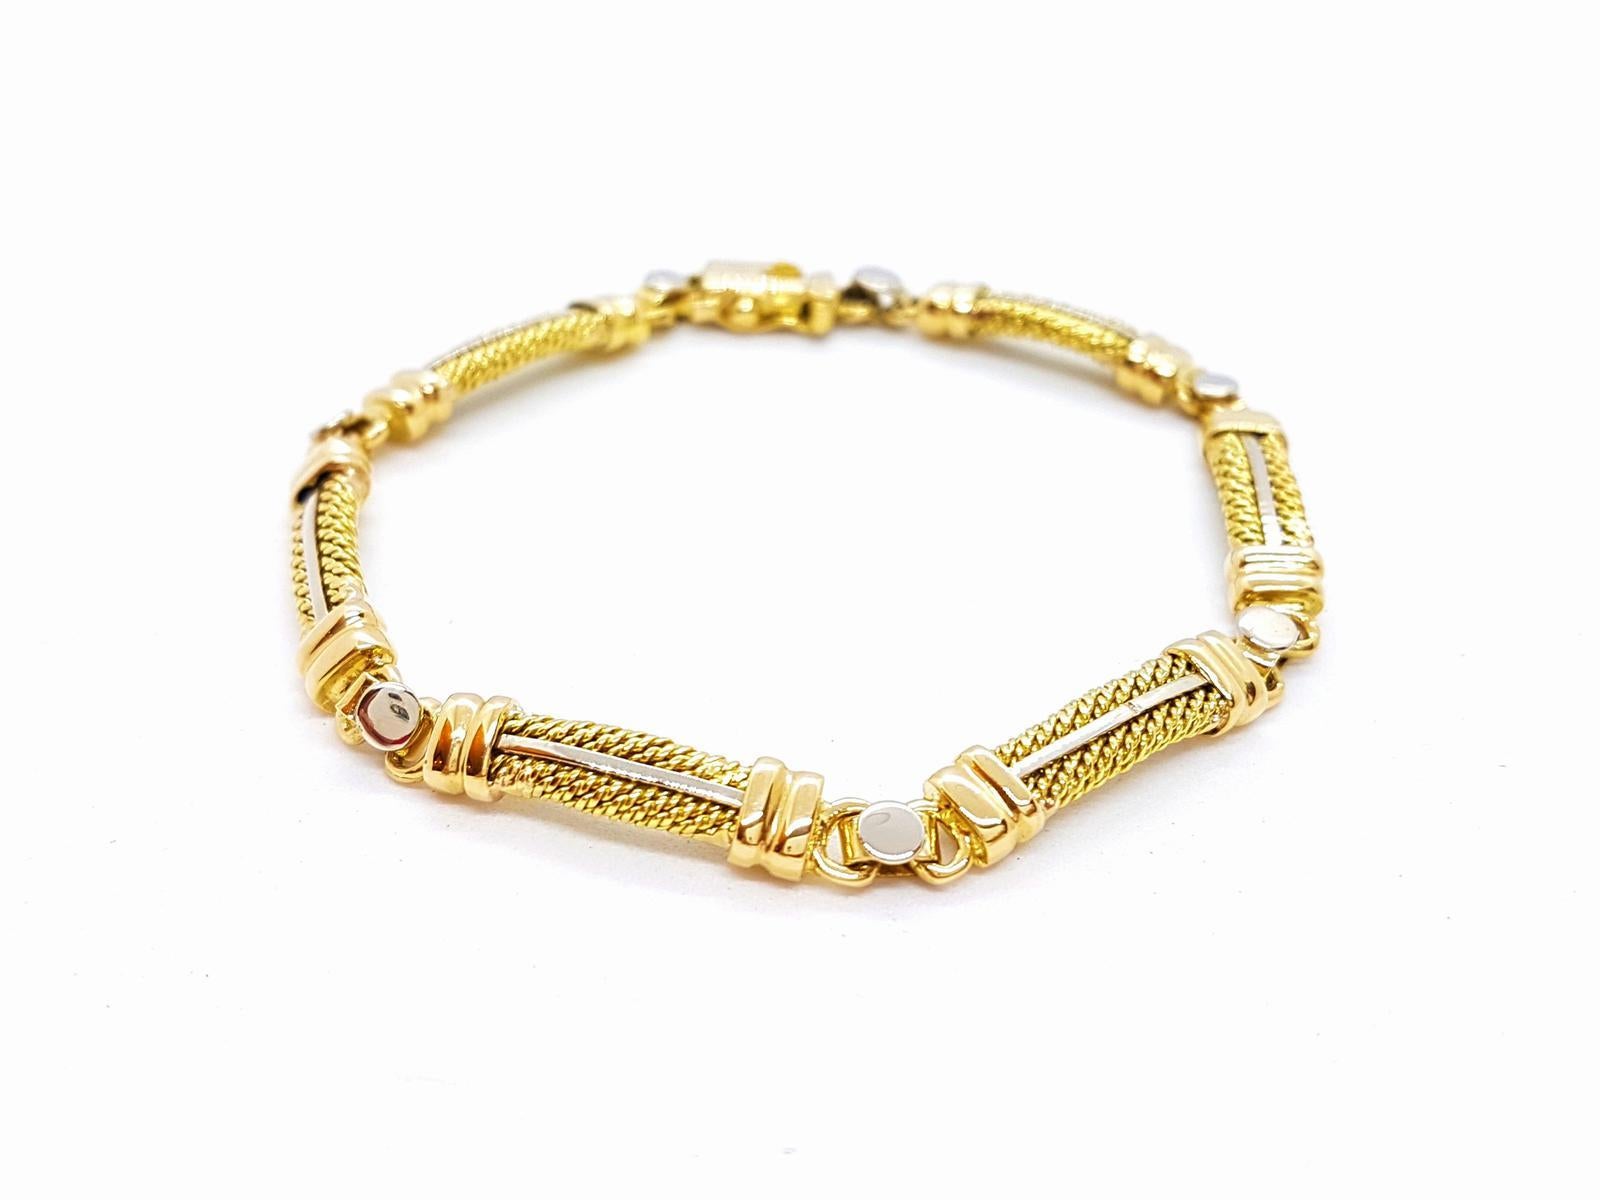 Bracelet yellow gold and white 750 mils (18K). composed of 6 bars. length: 18 cm. width: 0.52 cm. total weight: 18.95 g. punched. excellent condition
